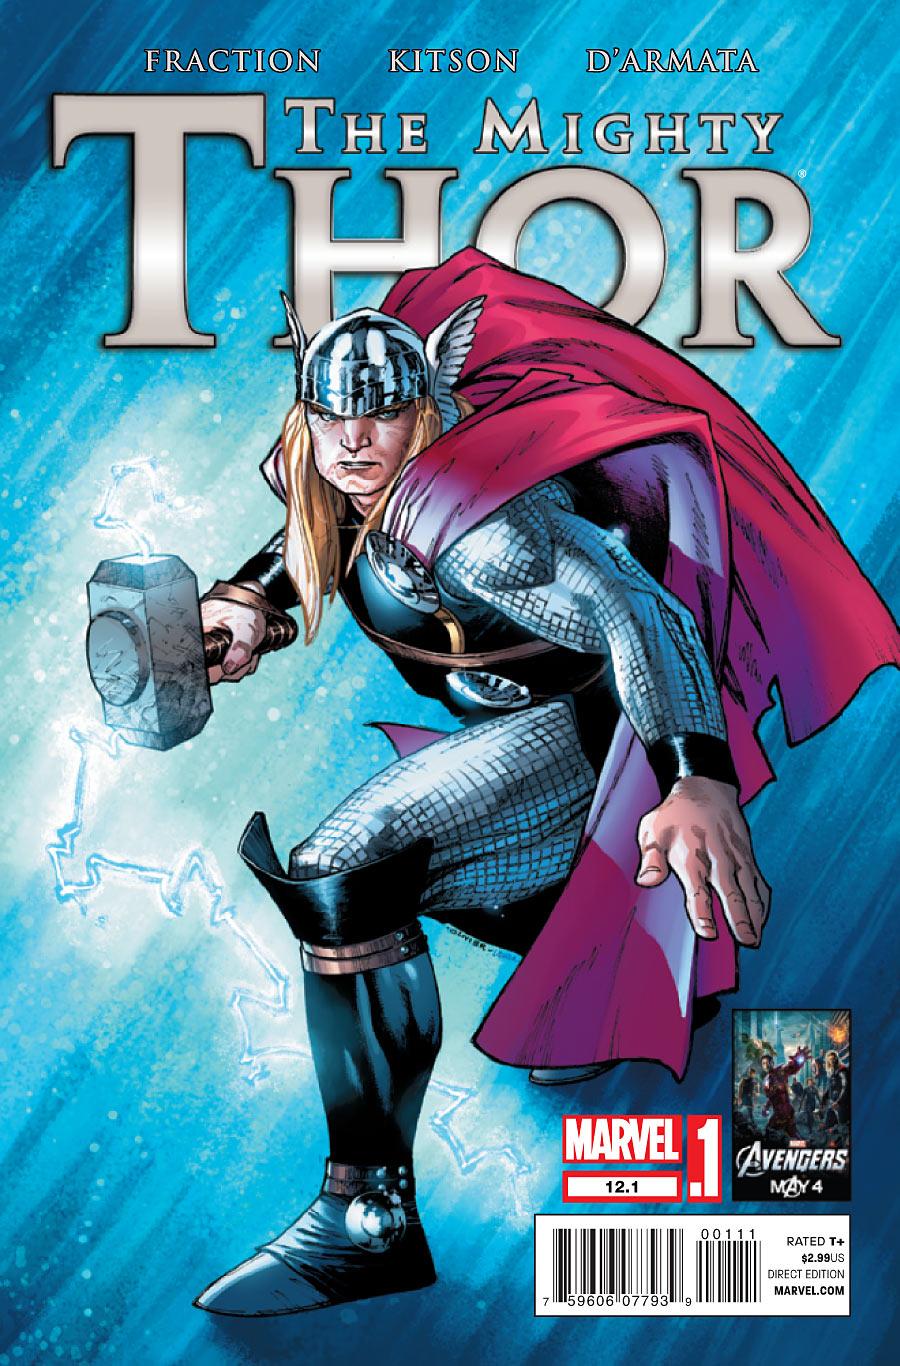 The Mighty Thor Vol. 1 #12.1